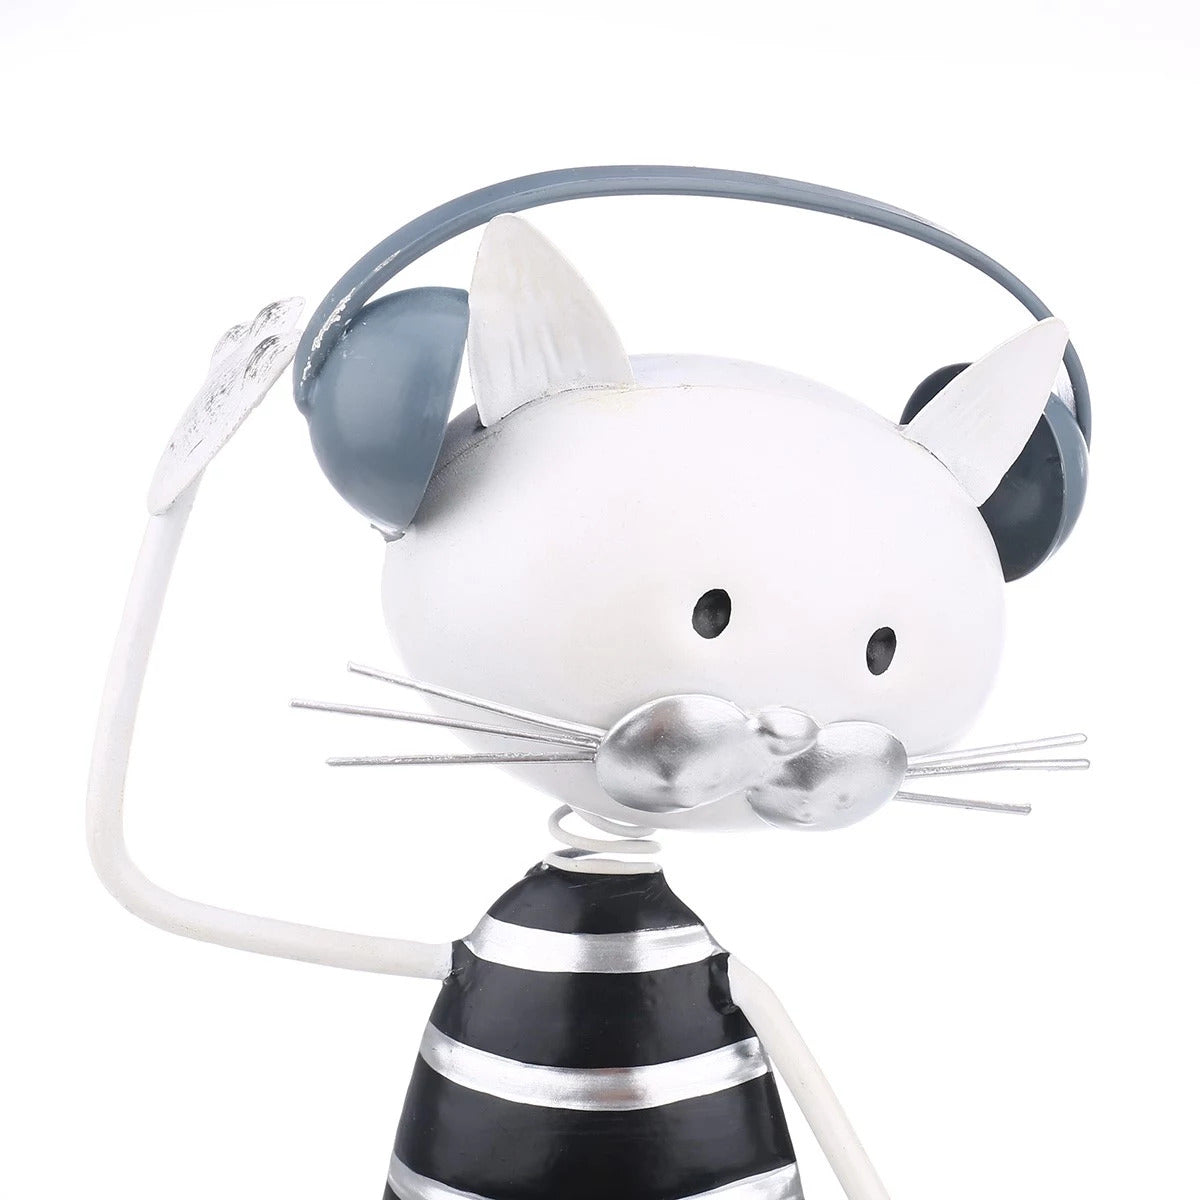 Cartoon Cat Sculpture Ornaments and Decor Can a Cat Listen to Music and Dance inspired by Felix the Cat and Sylvester the Cat Figurines